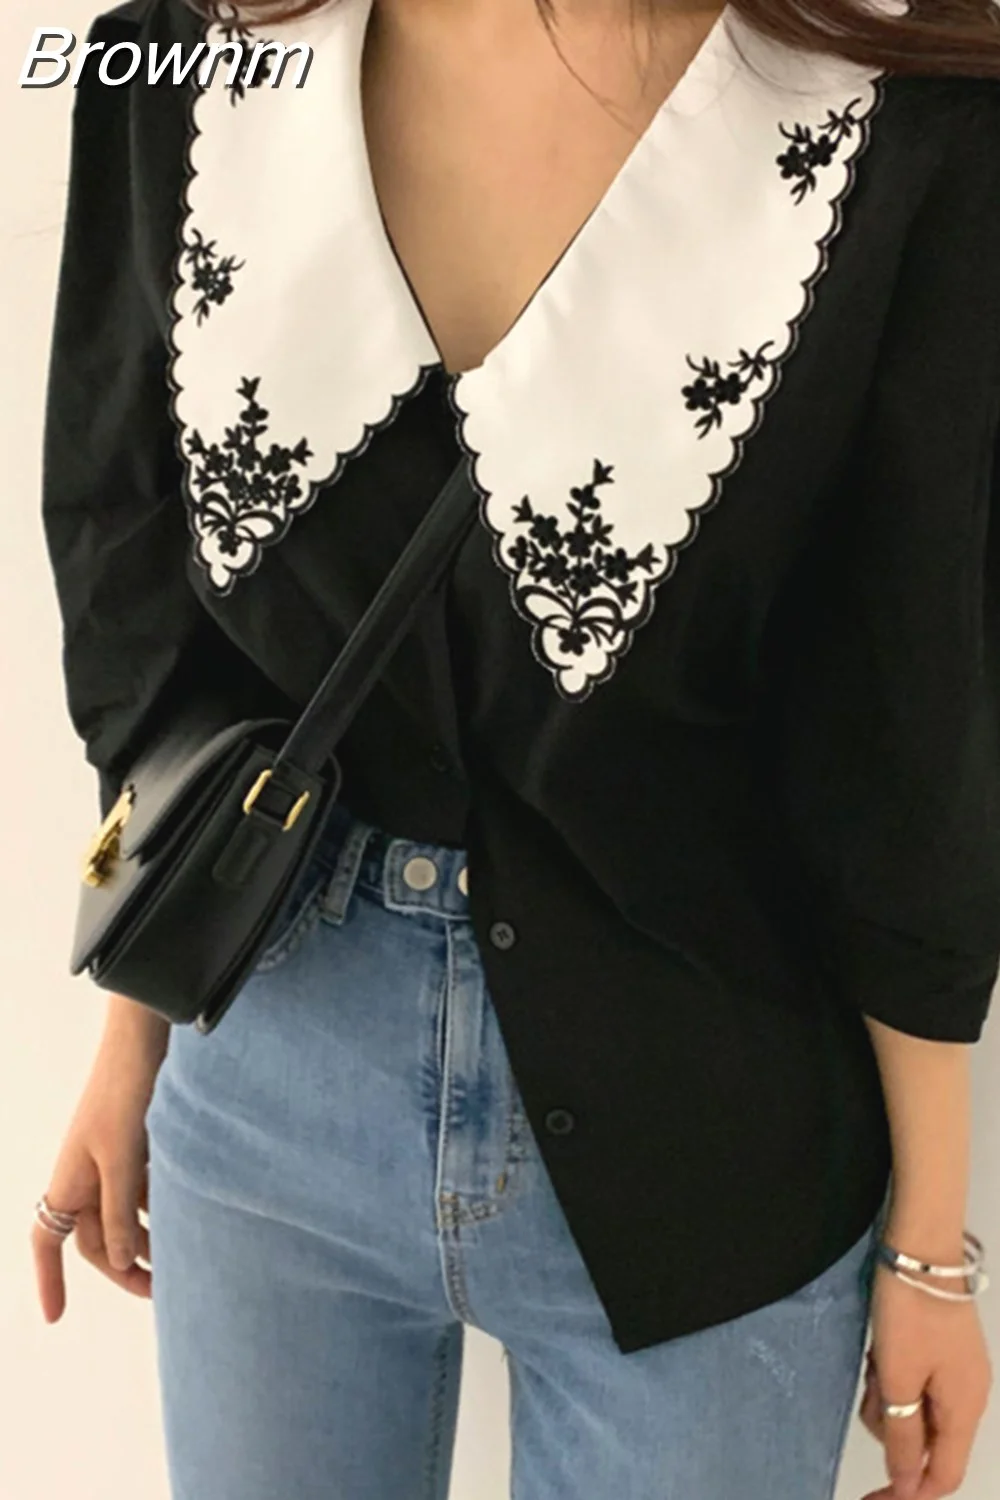 Brownm White Floral Embroidery Women Shirts Vintage Blusas Mujer De Moda 2023 Korean Chic Puff Sleeve Blouse Clothes Tops 14223